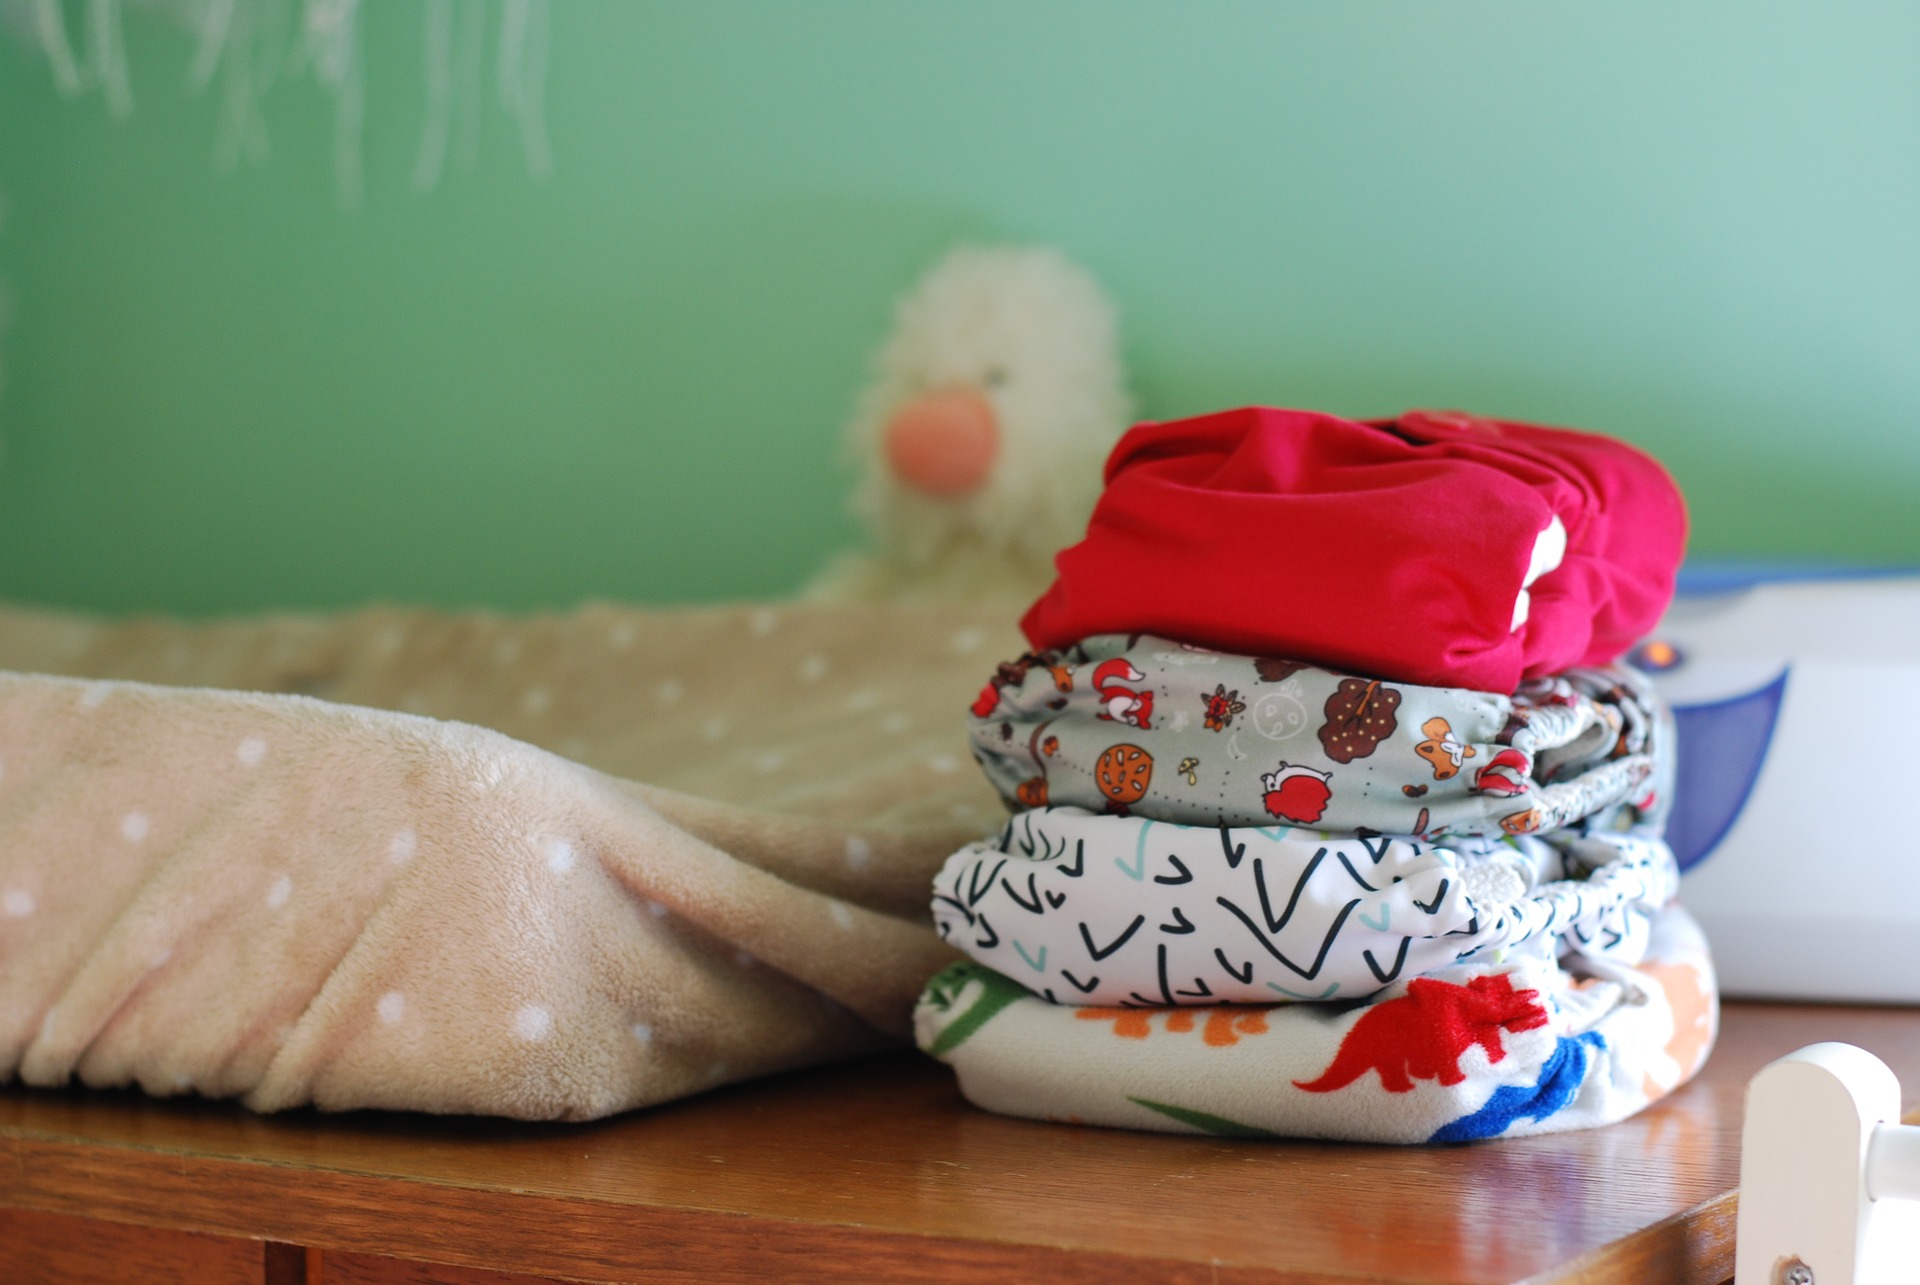 Four cloth diapers piled up on each other, with various colors and designs.